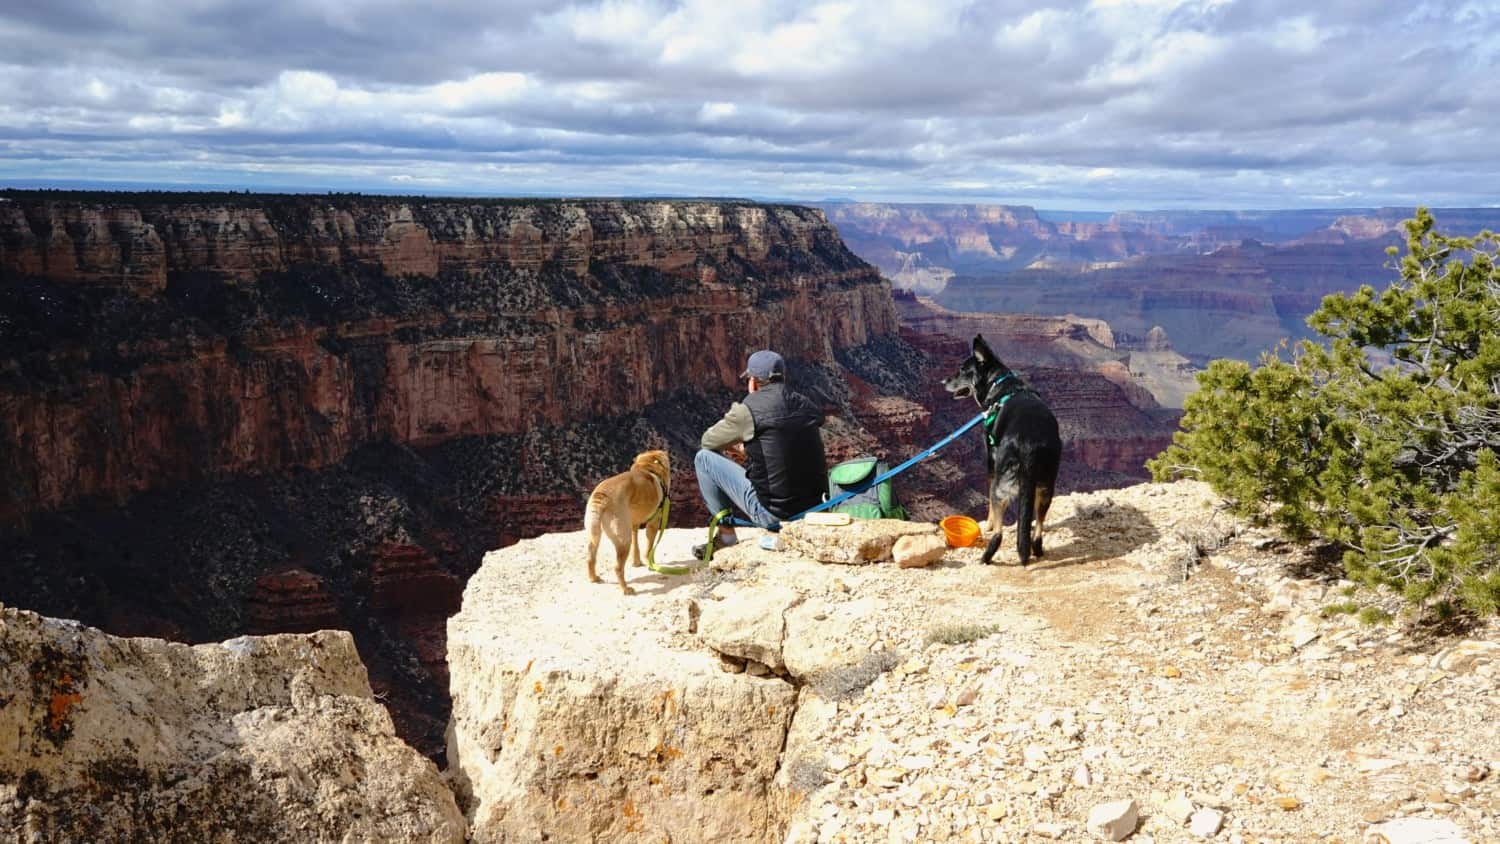 Man and two dogs enjoying the view at Grand Canyon National Park